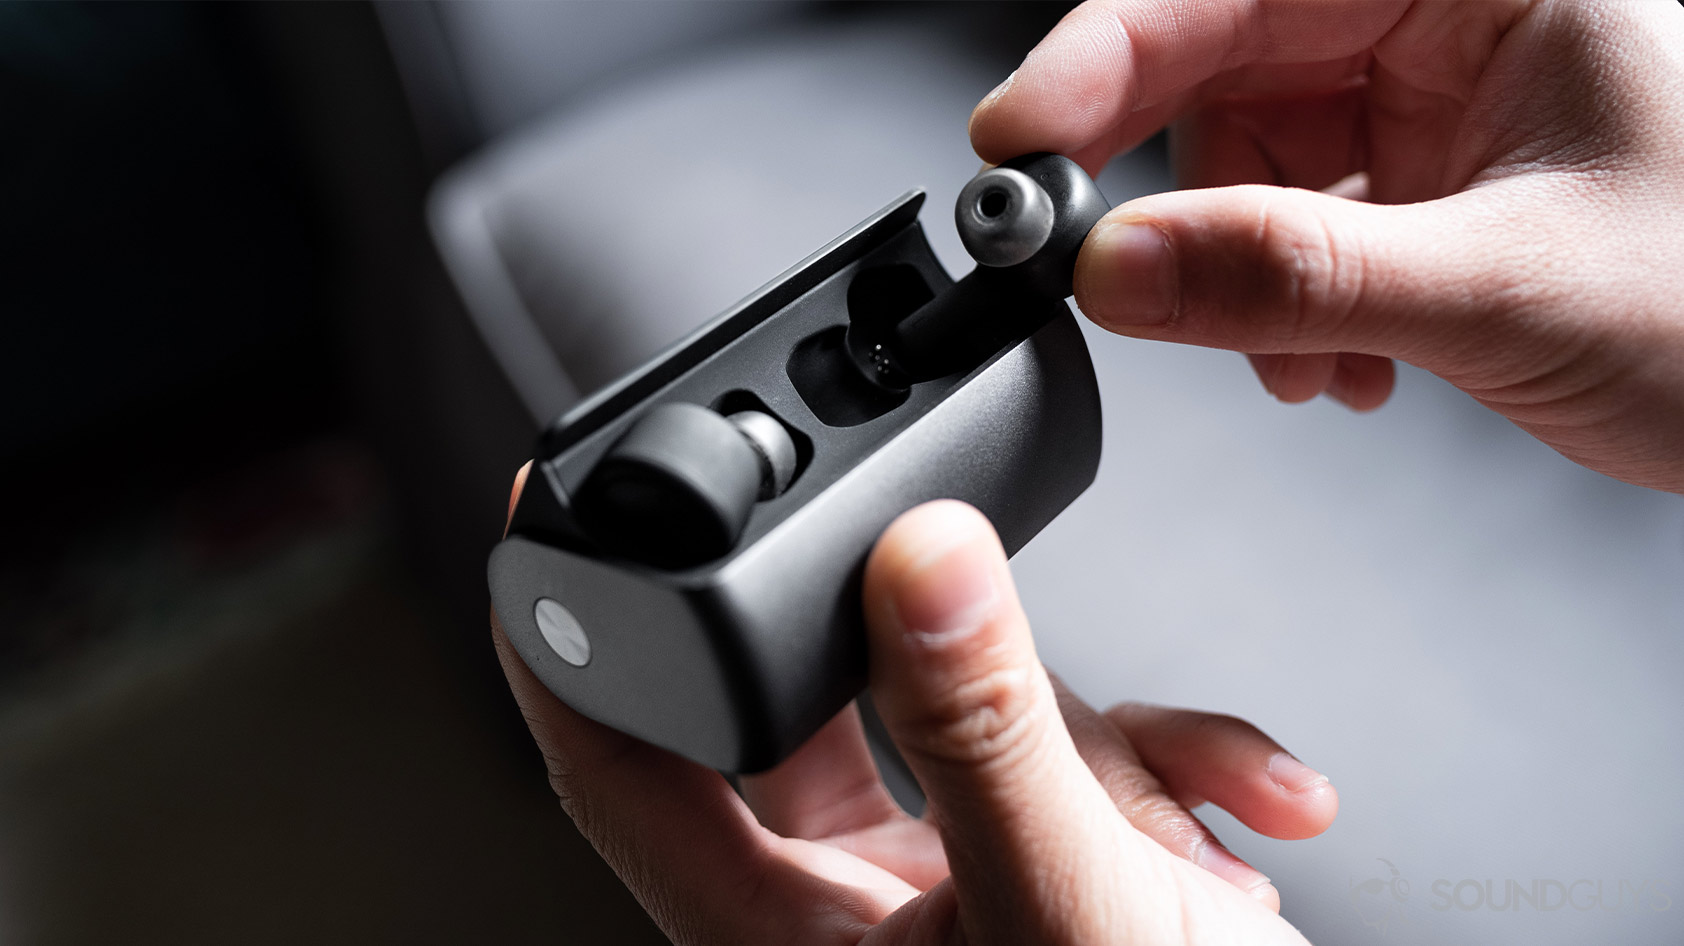 A picture of the RHA TrueConnect 2 case being held in a woman's hand as the other hand removes the far earbud.